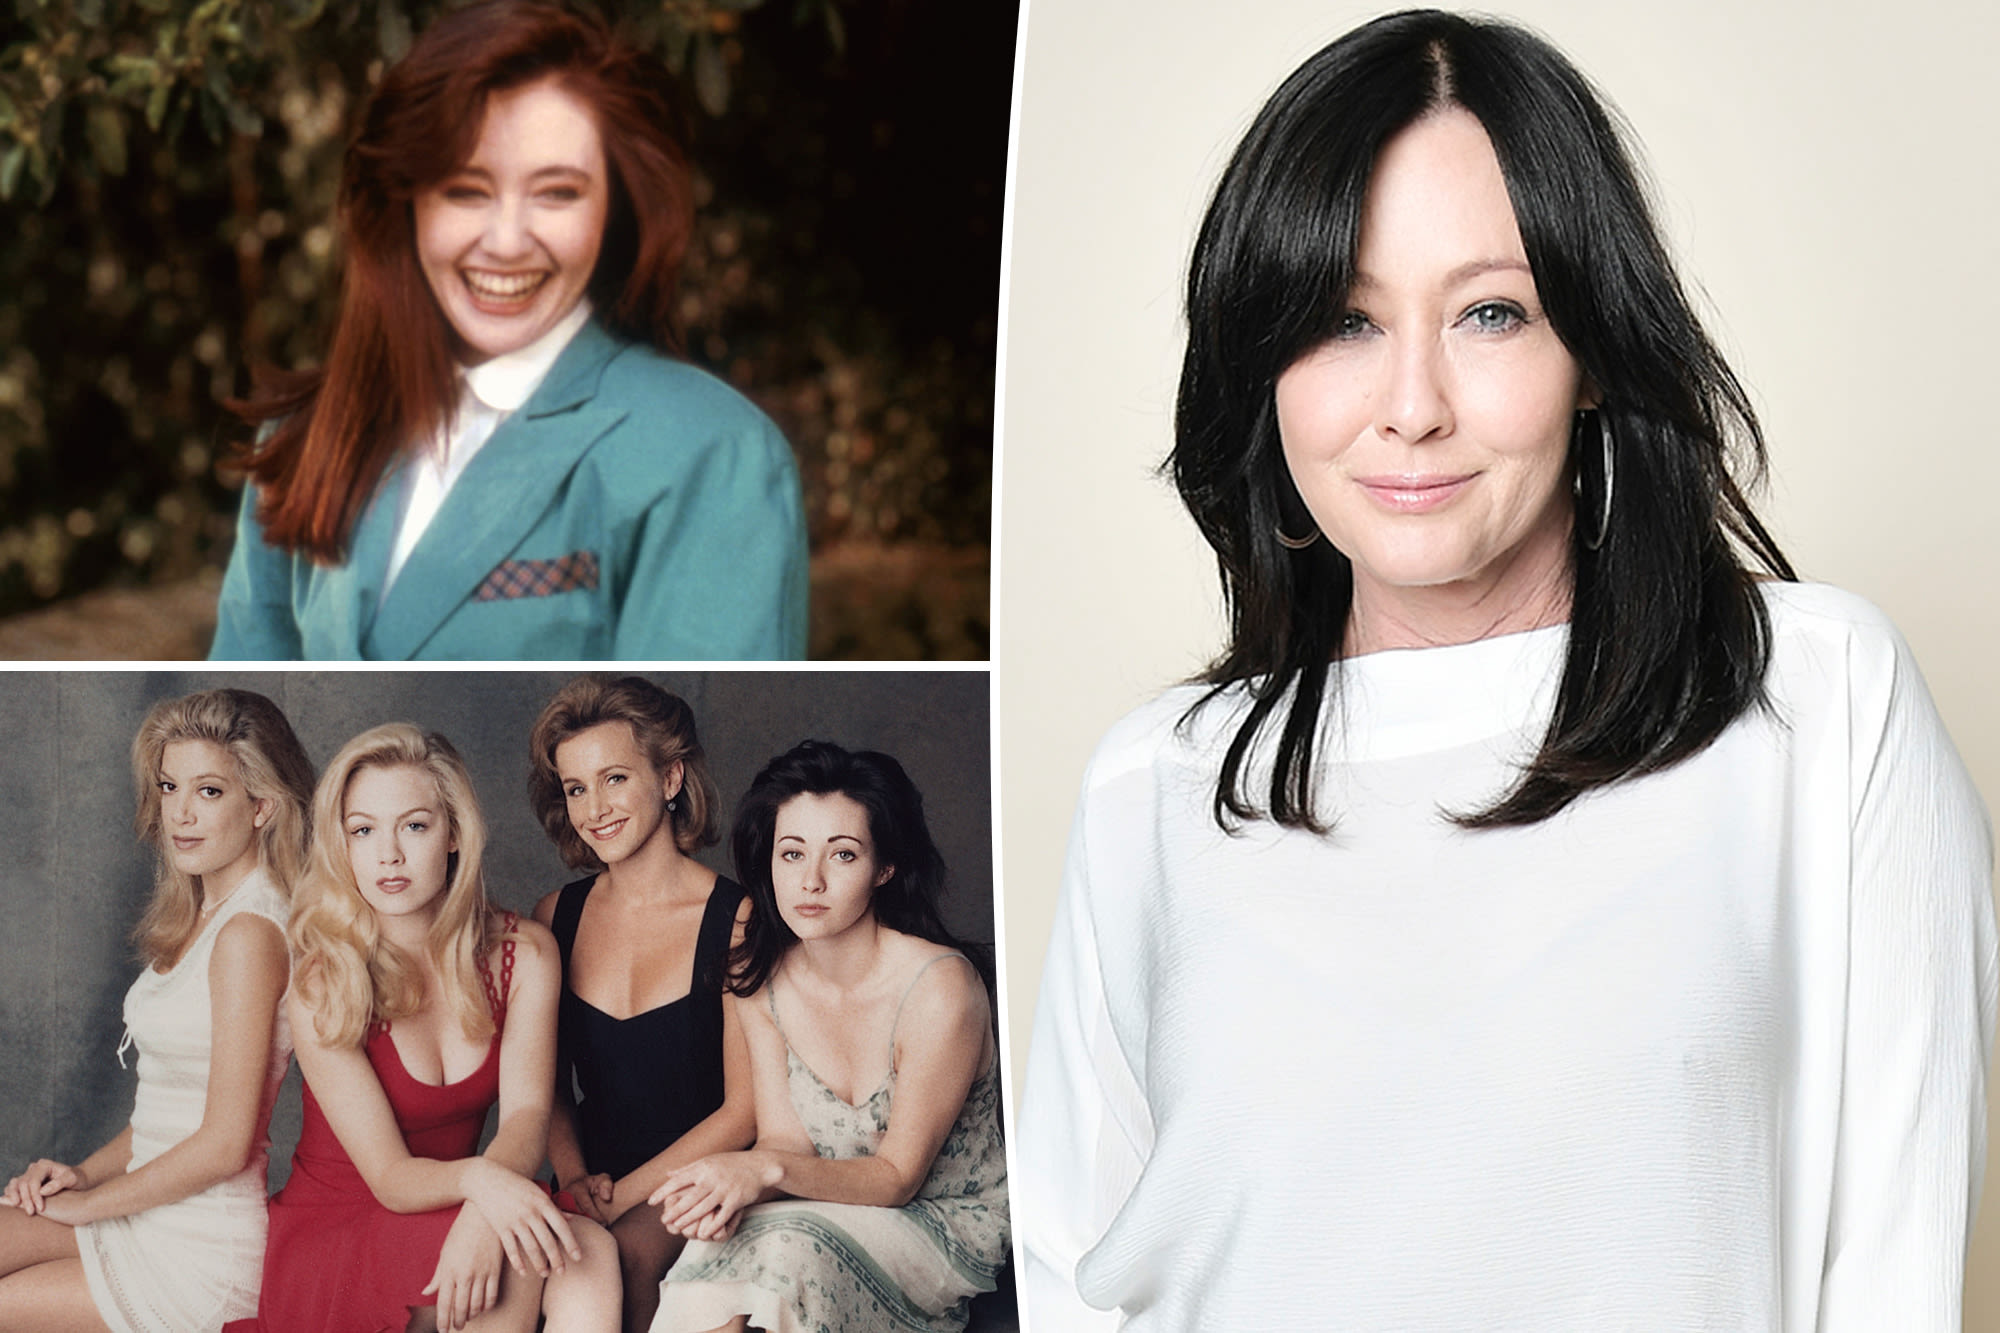 Shannen Doherty, ‘Beverly Hills, 90210’ actress, dead at 53